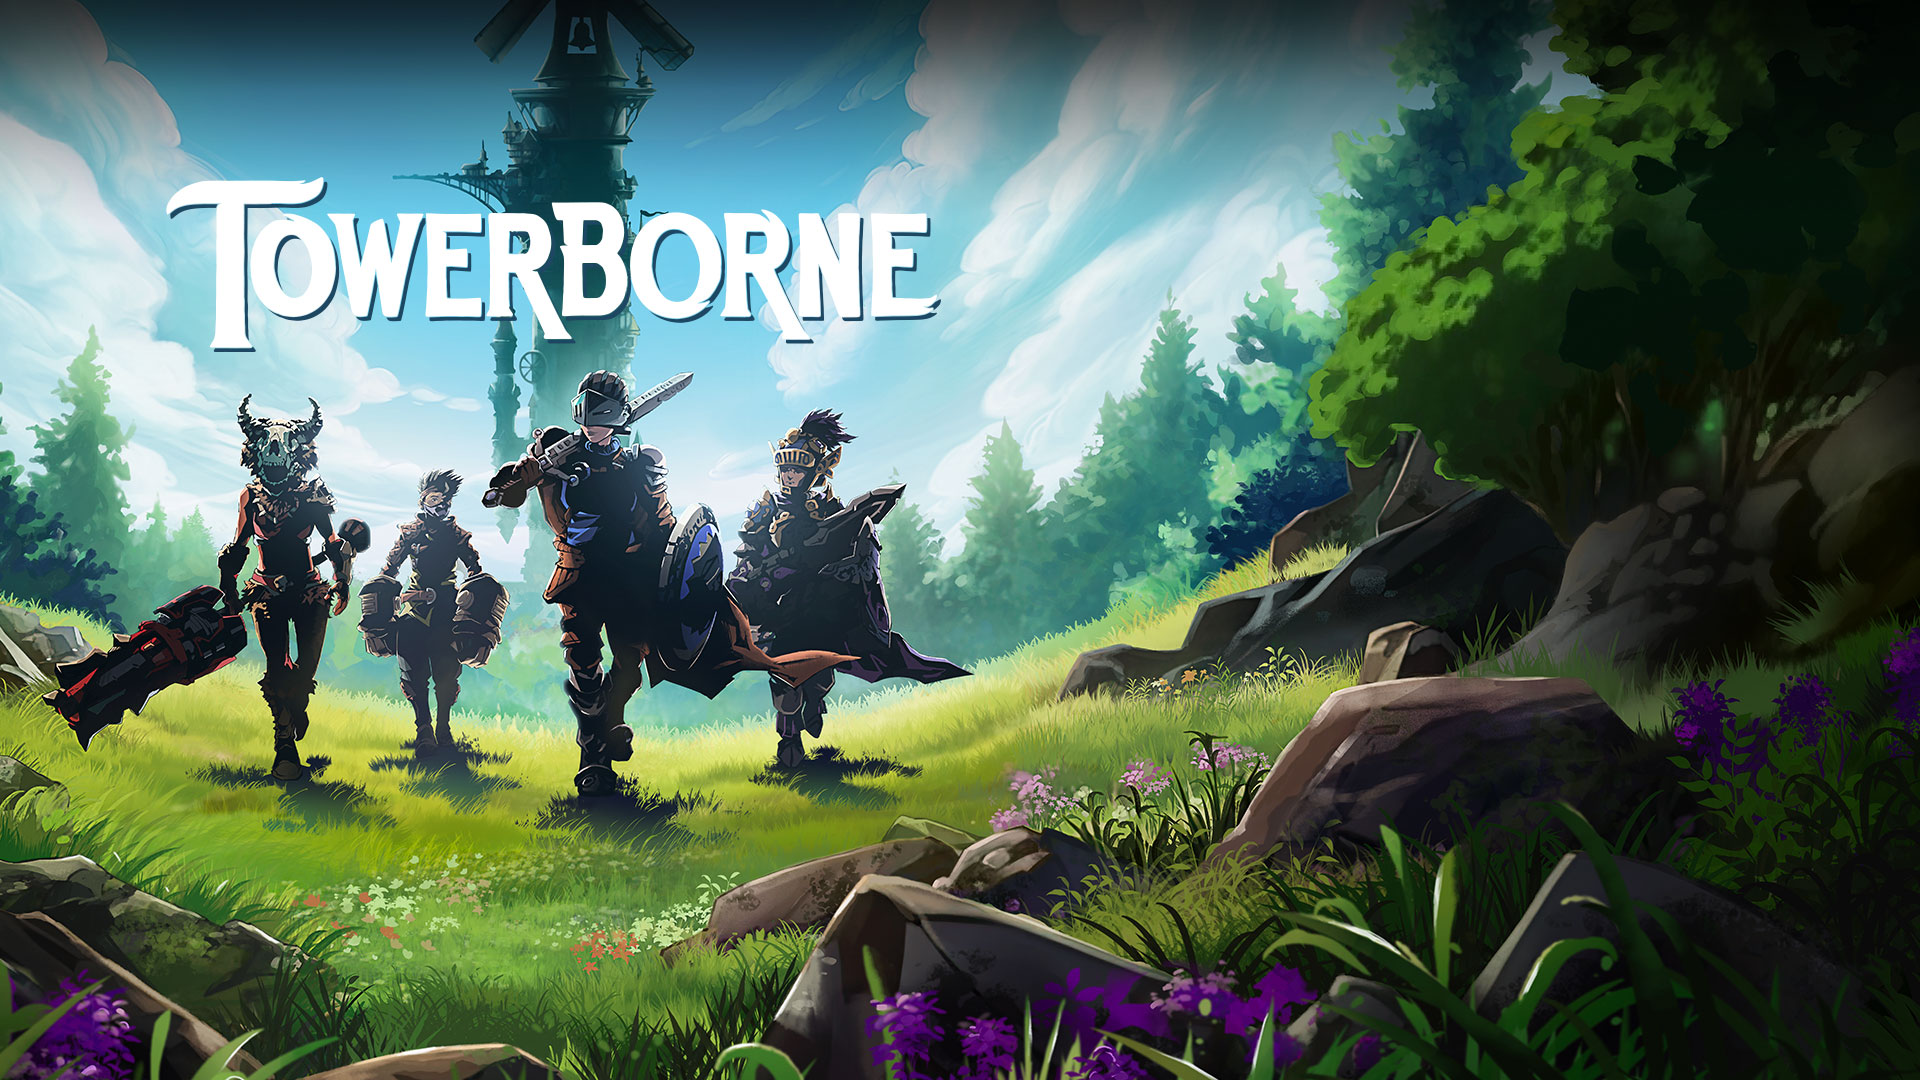 Towerborne, in the shadow of the Belfry, a tight knit crew strides proudly forward into the lush wilderness.